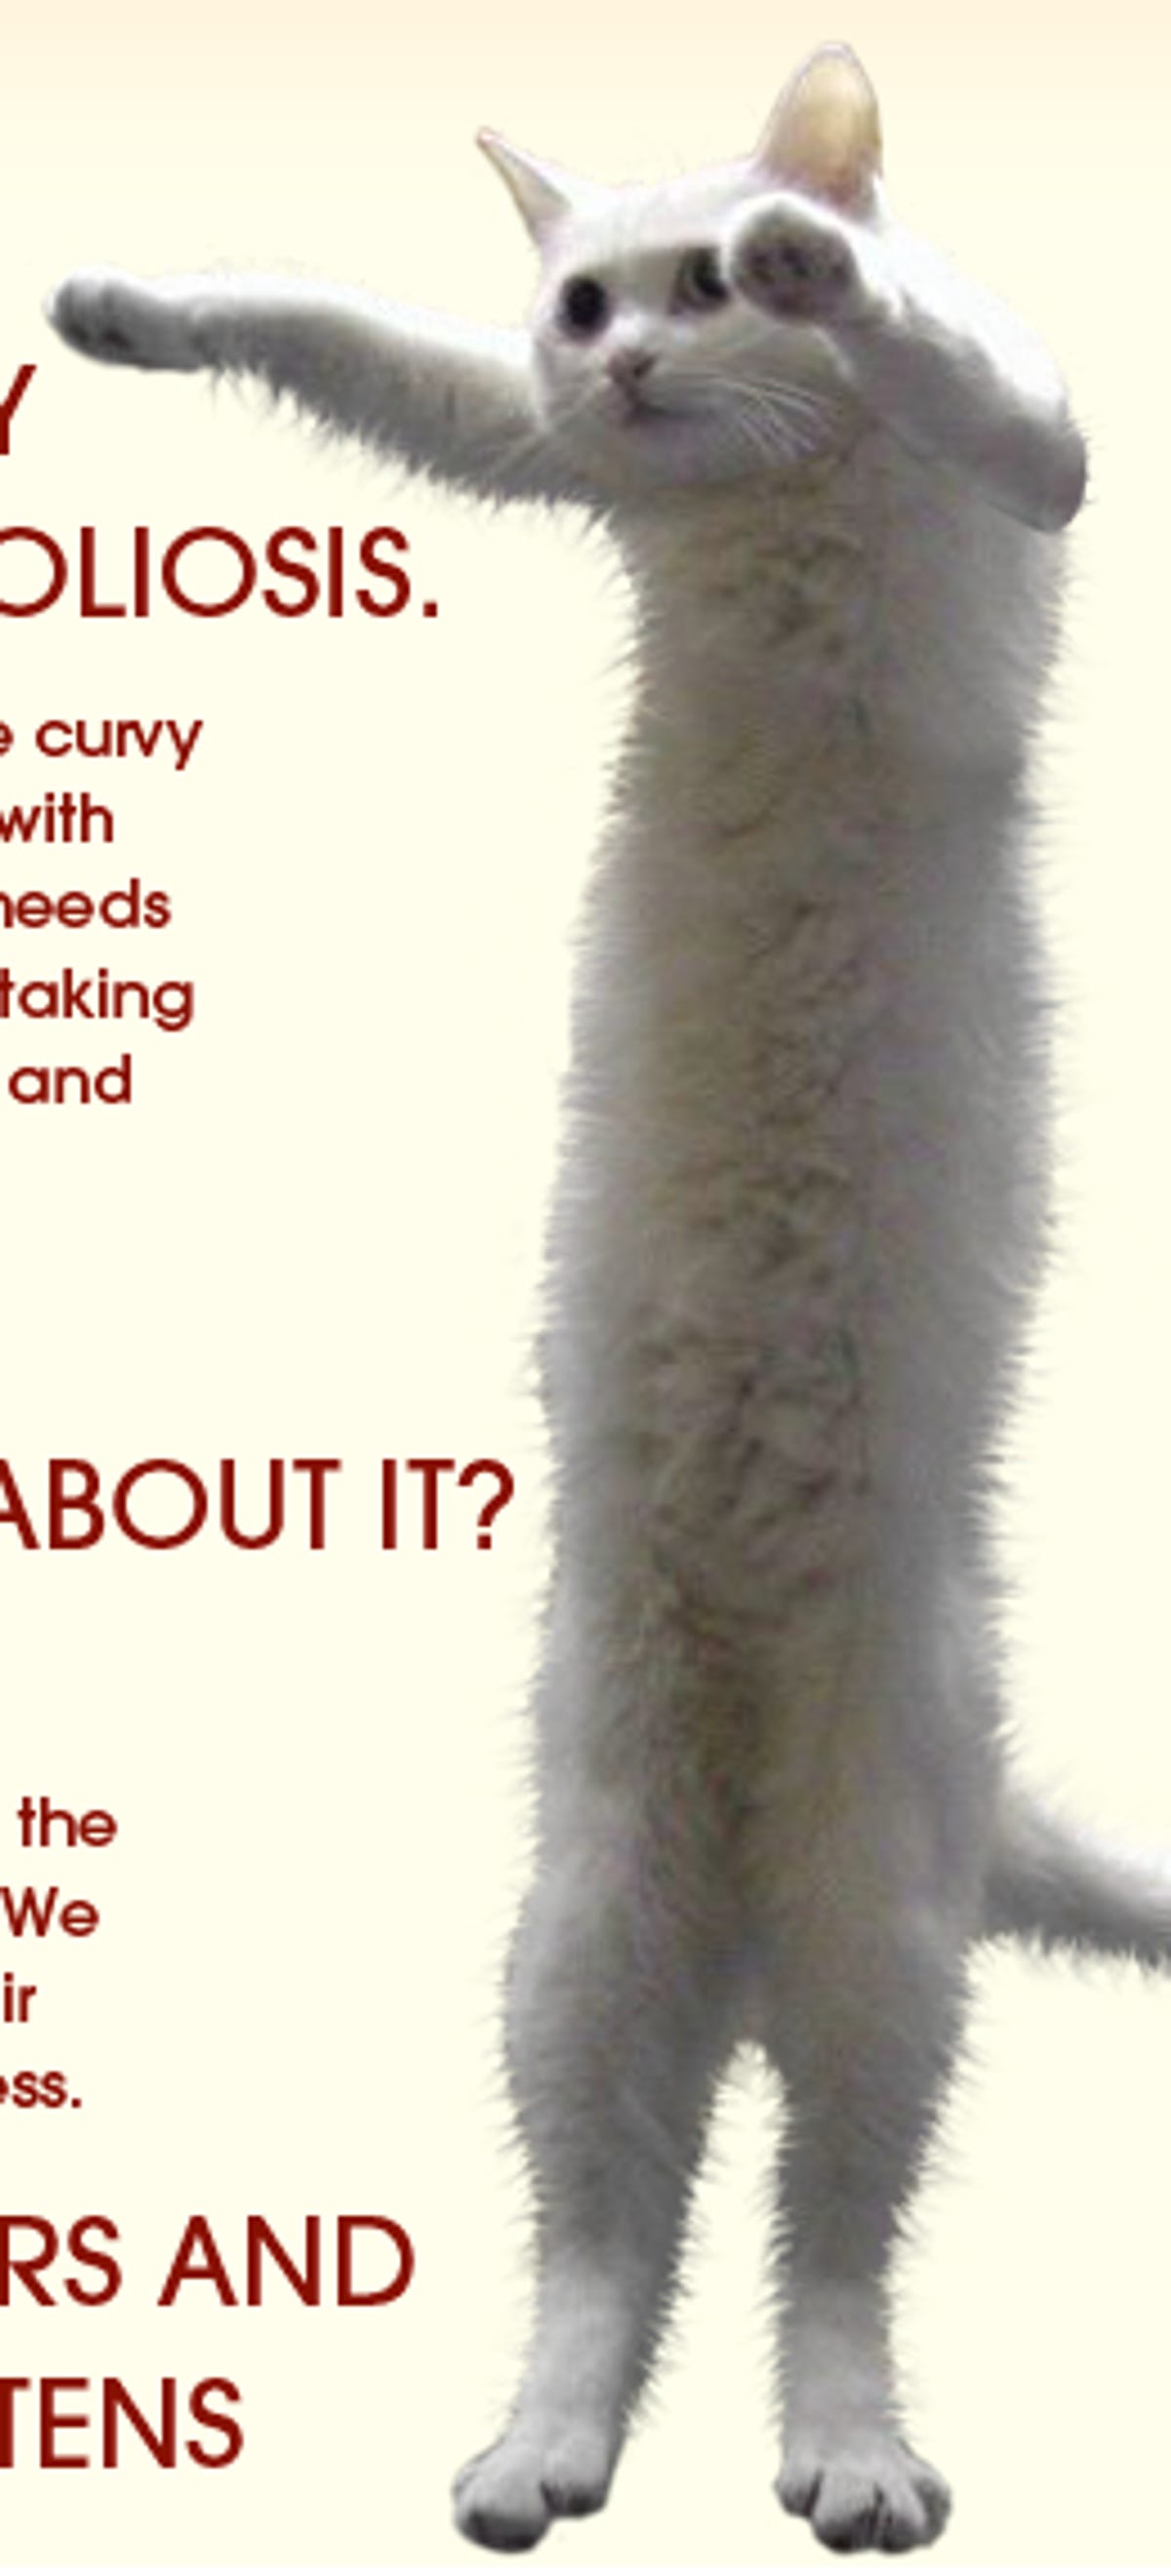 This is Longcat, a meme popularized on 4chan and used on a flier that urges people to flood the /b/ message board on the site with cute cat pictures.